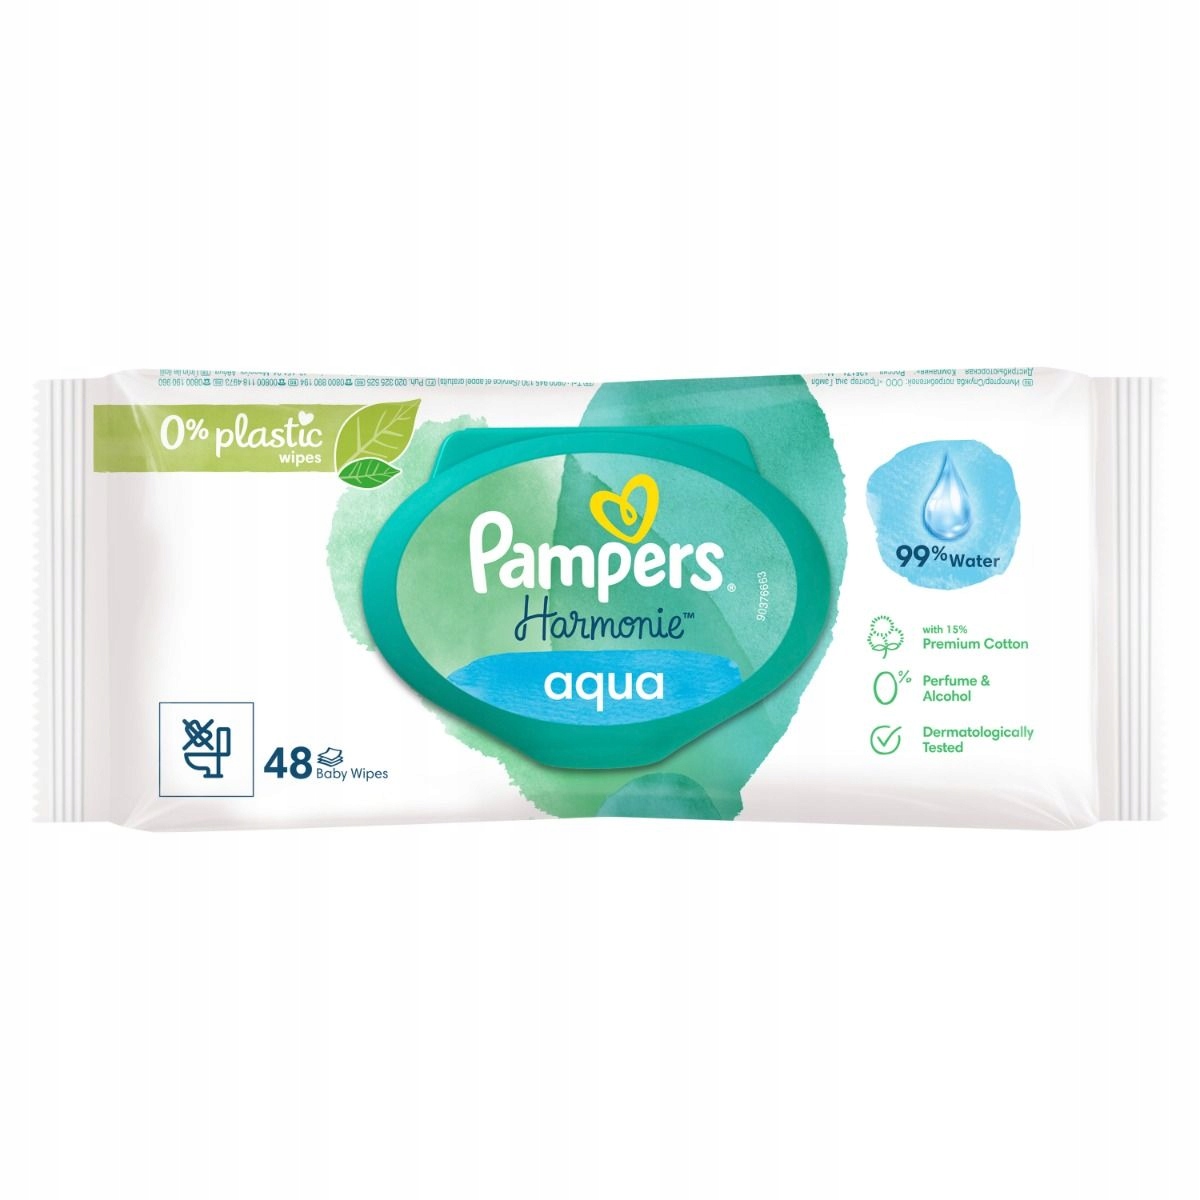 pampers giant box 3